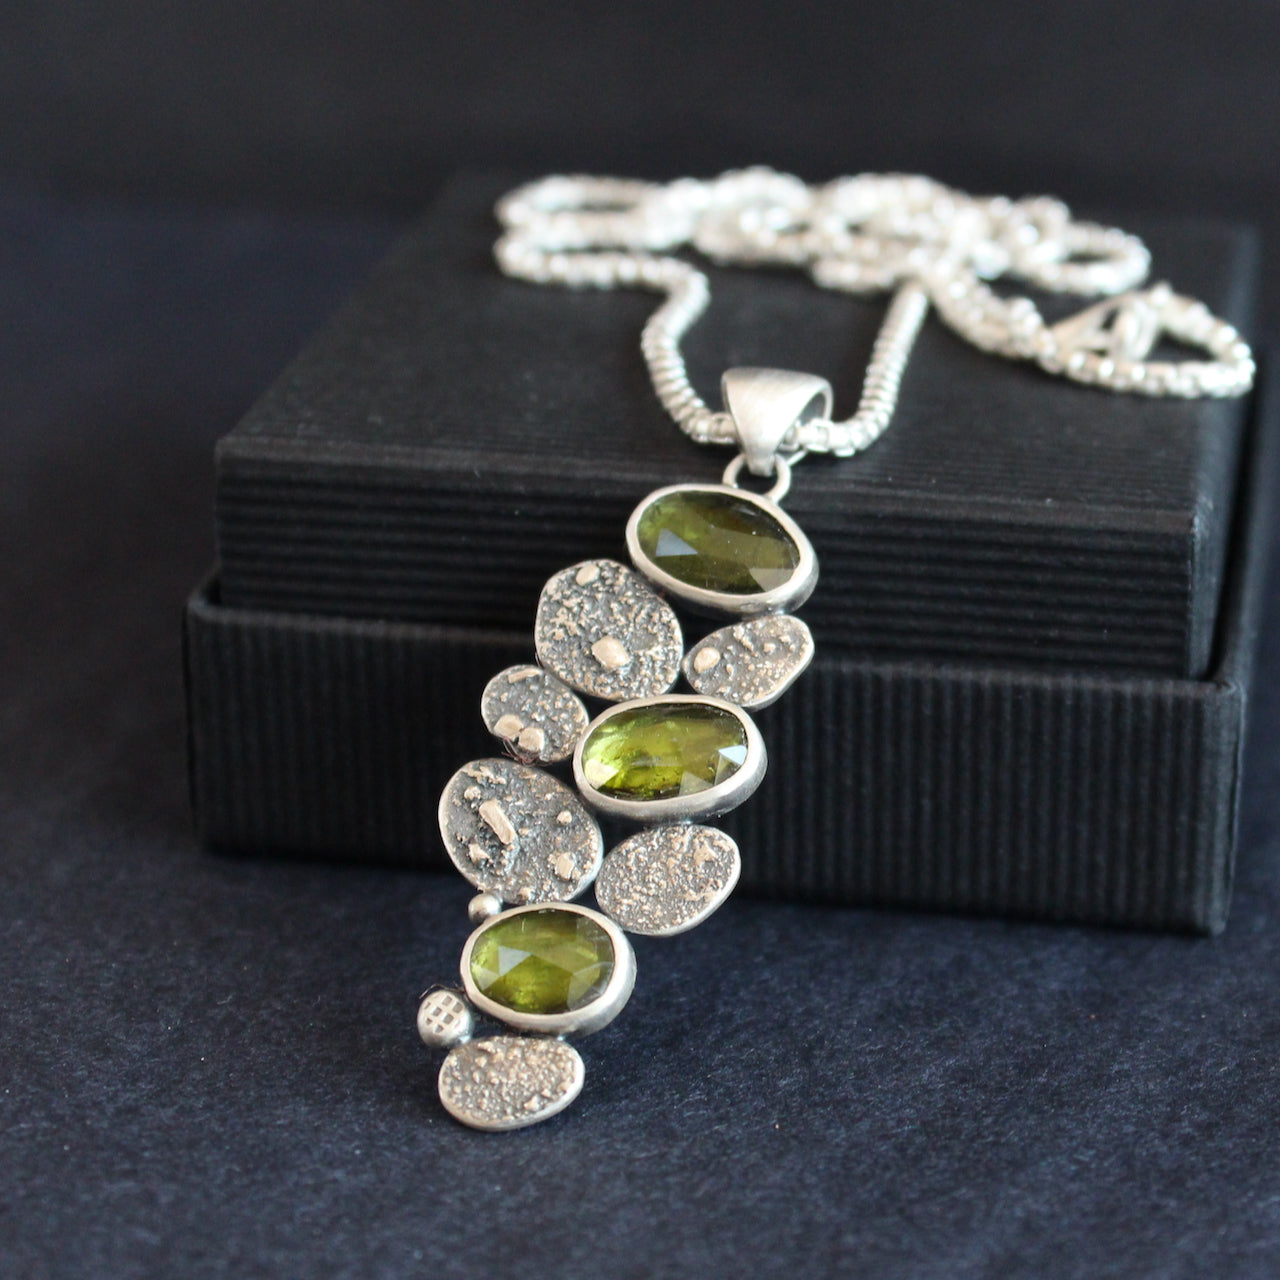 silver pendant of green stones and silver discs hanging from a silver chain by Cornwall jewellery designer Carin Lindberg